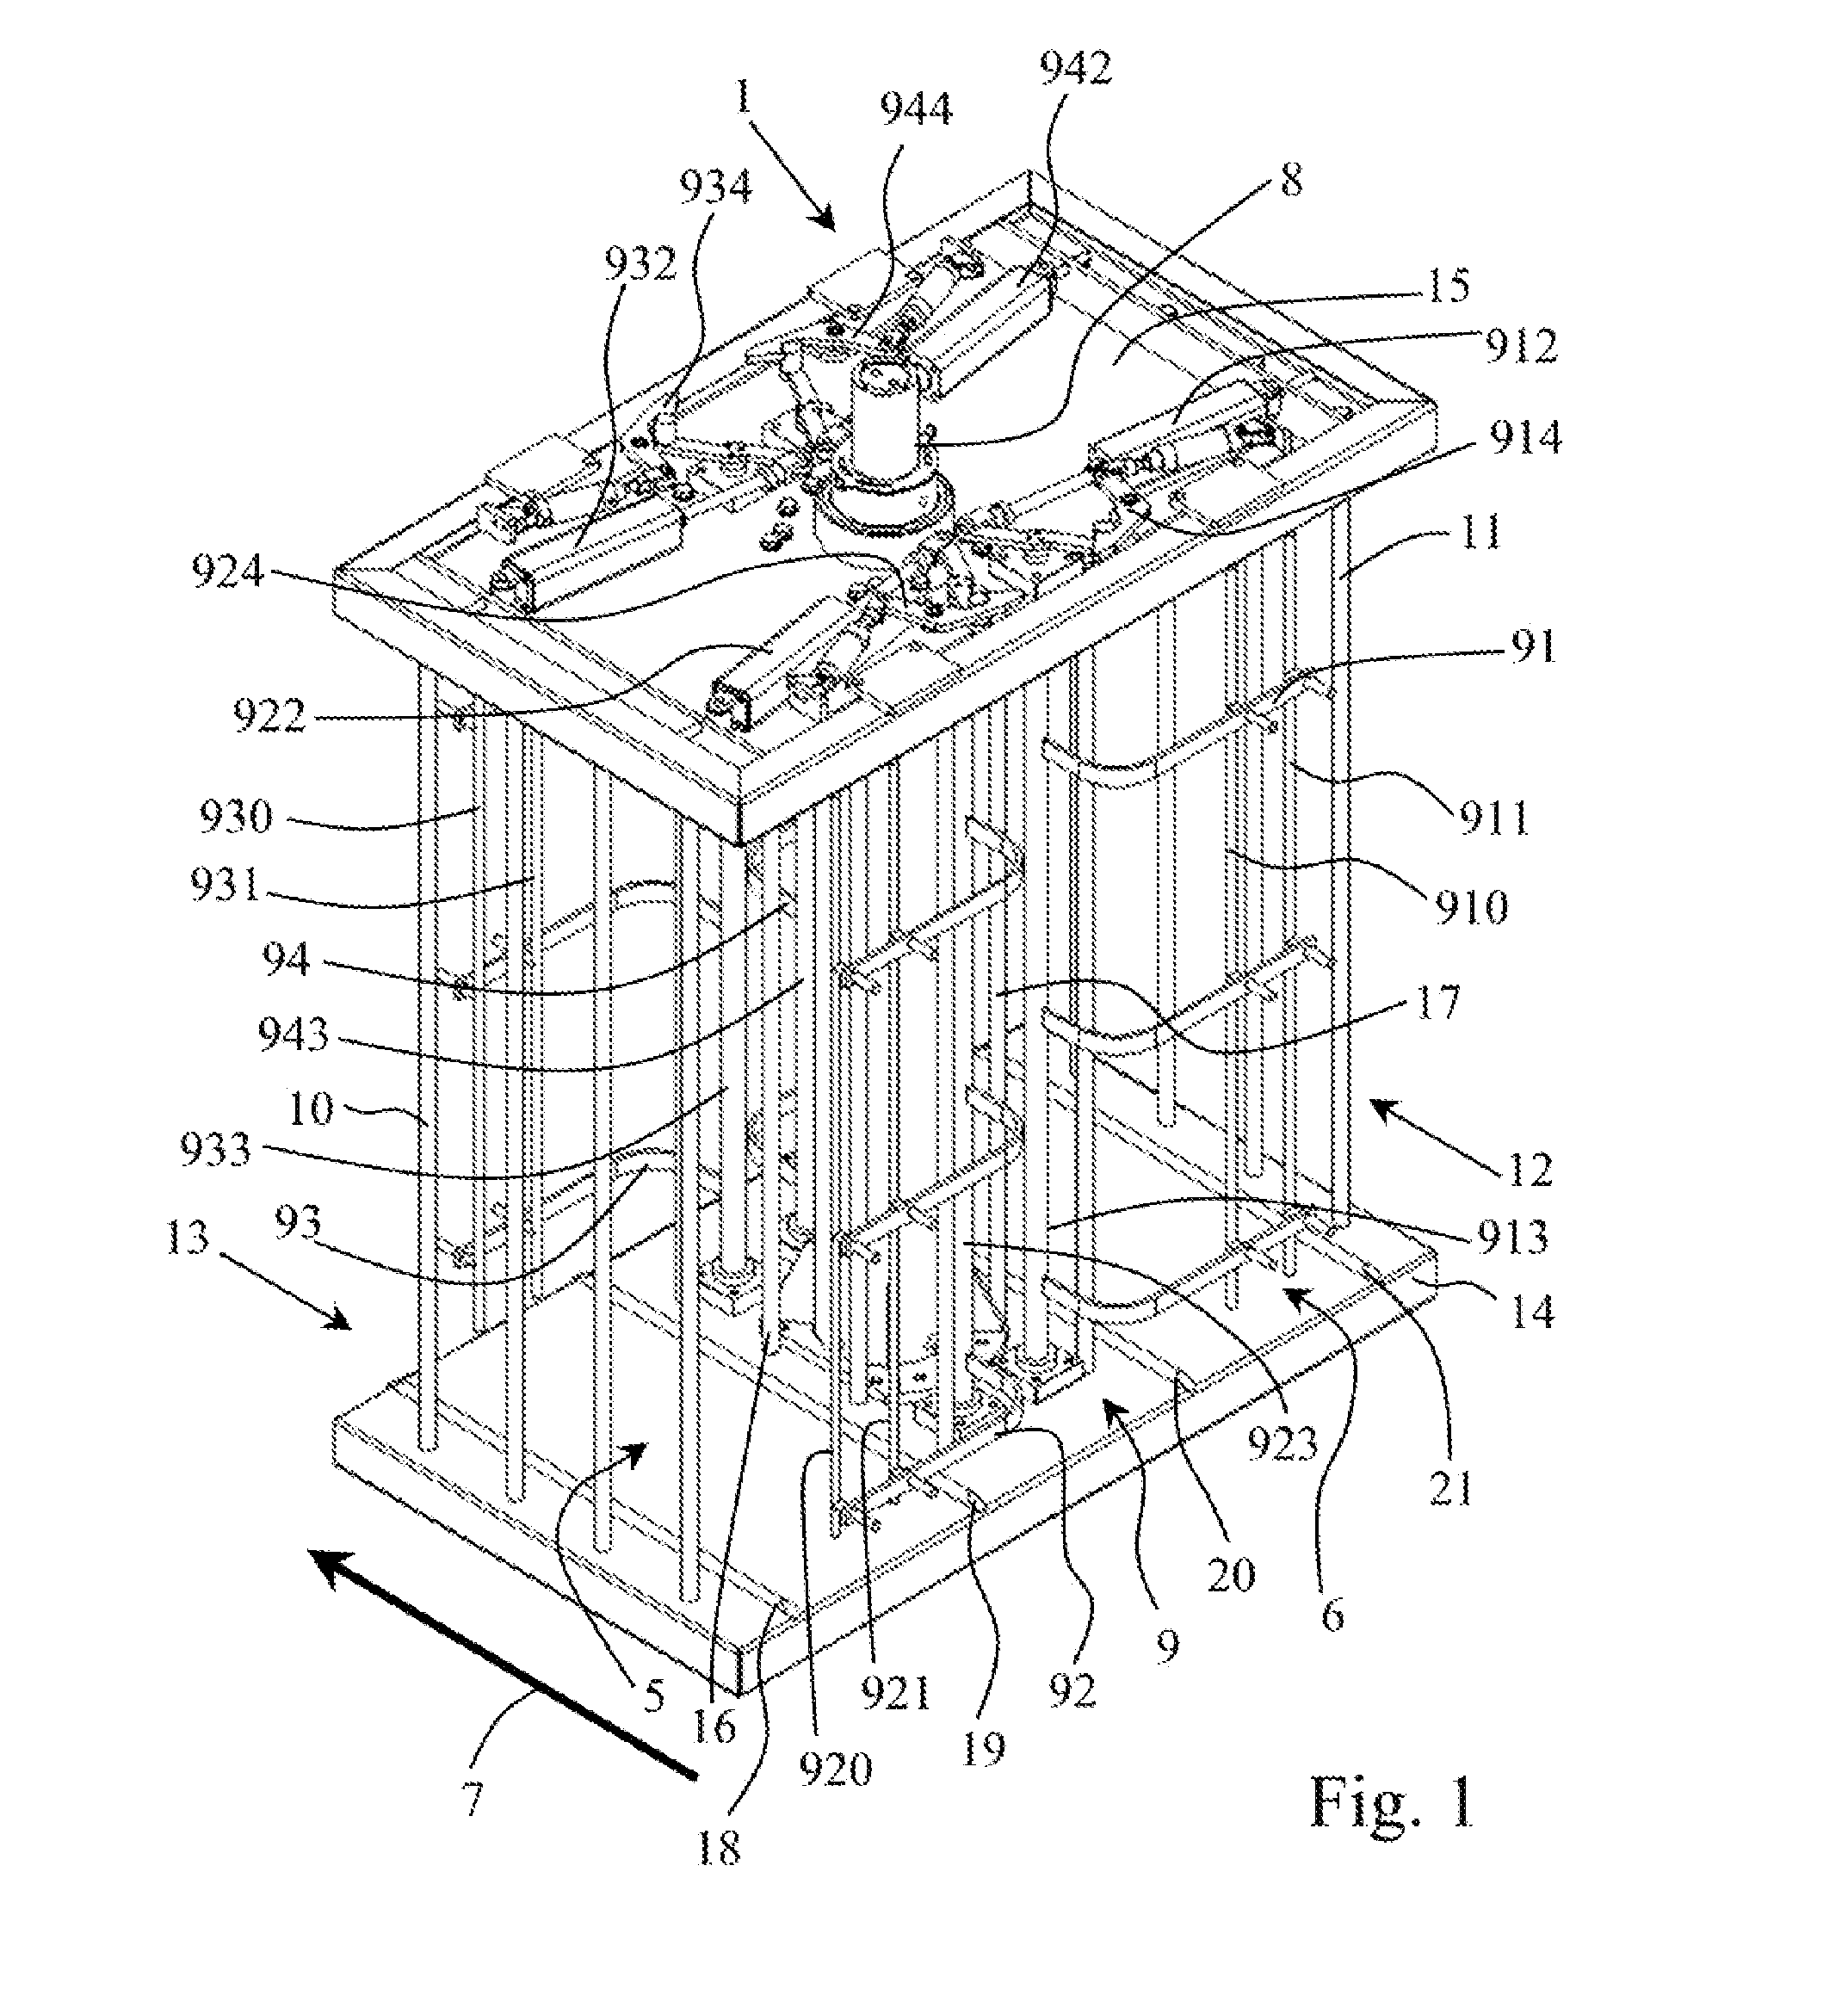 Container drying device